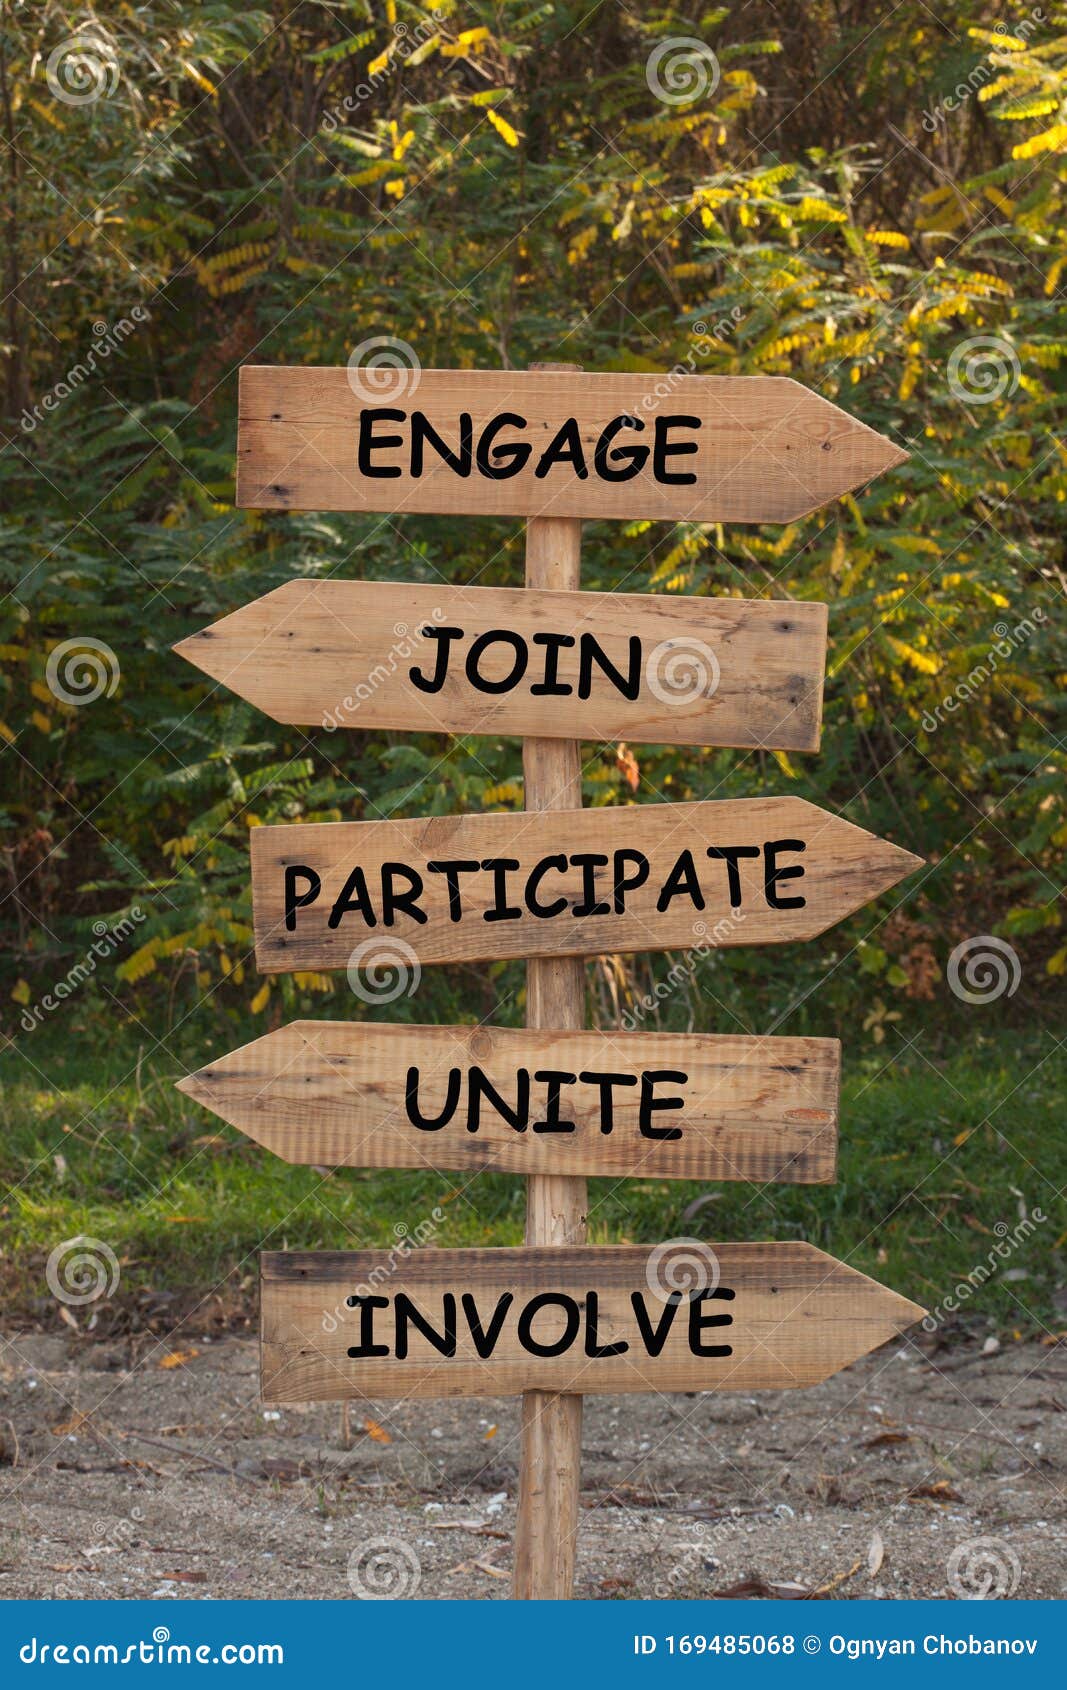 engage join participate involve